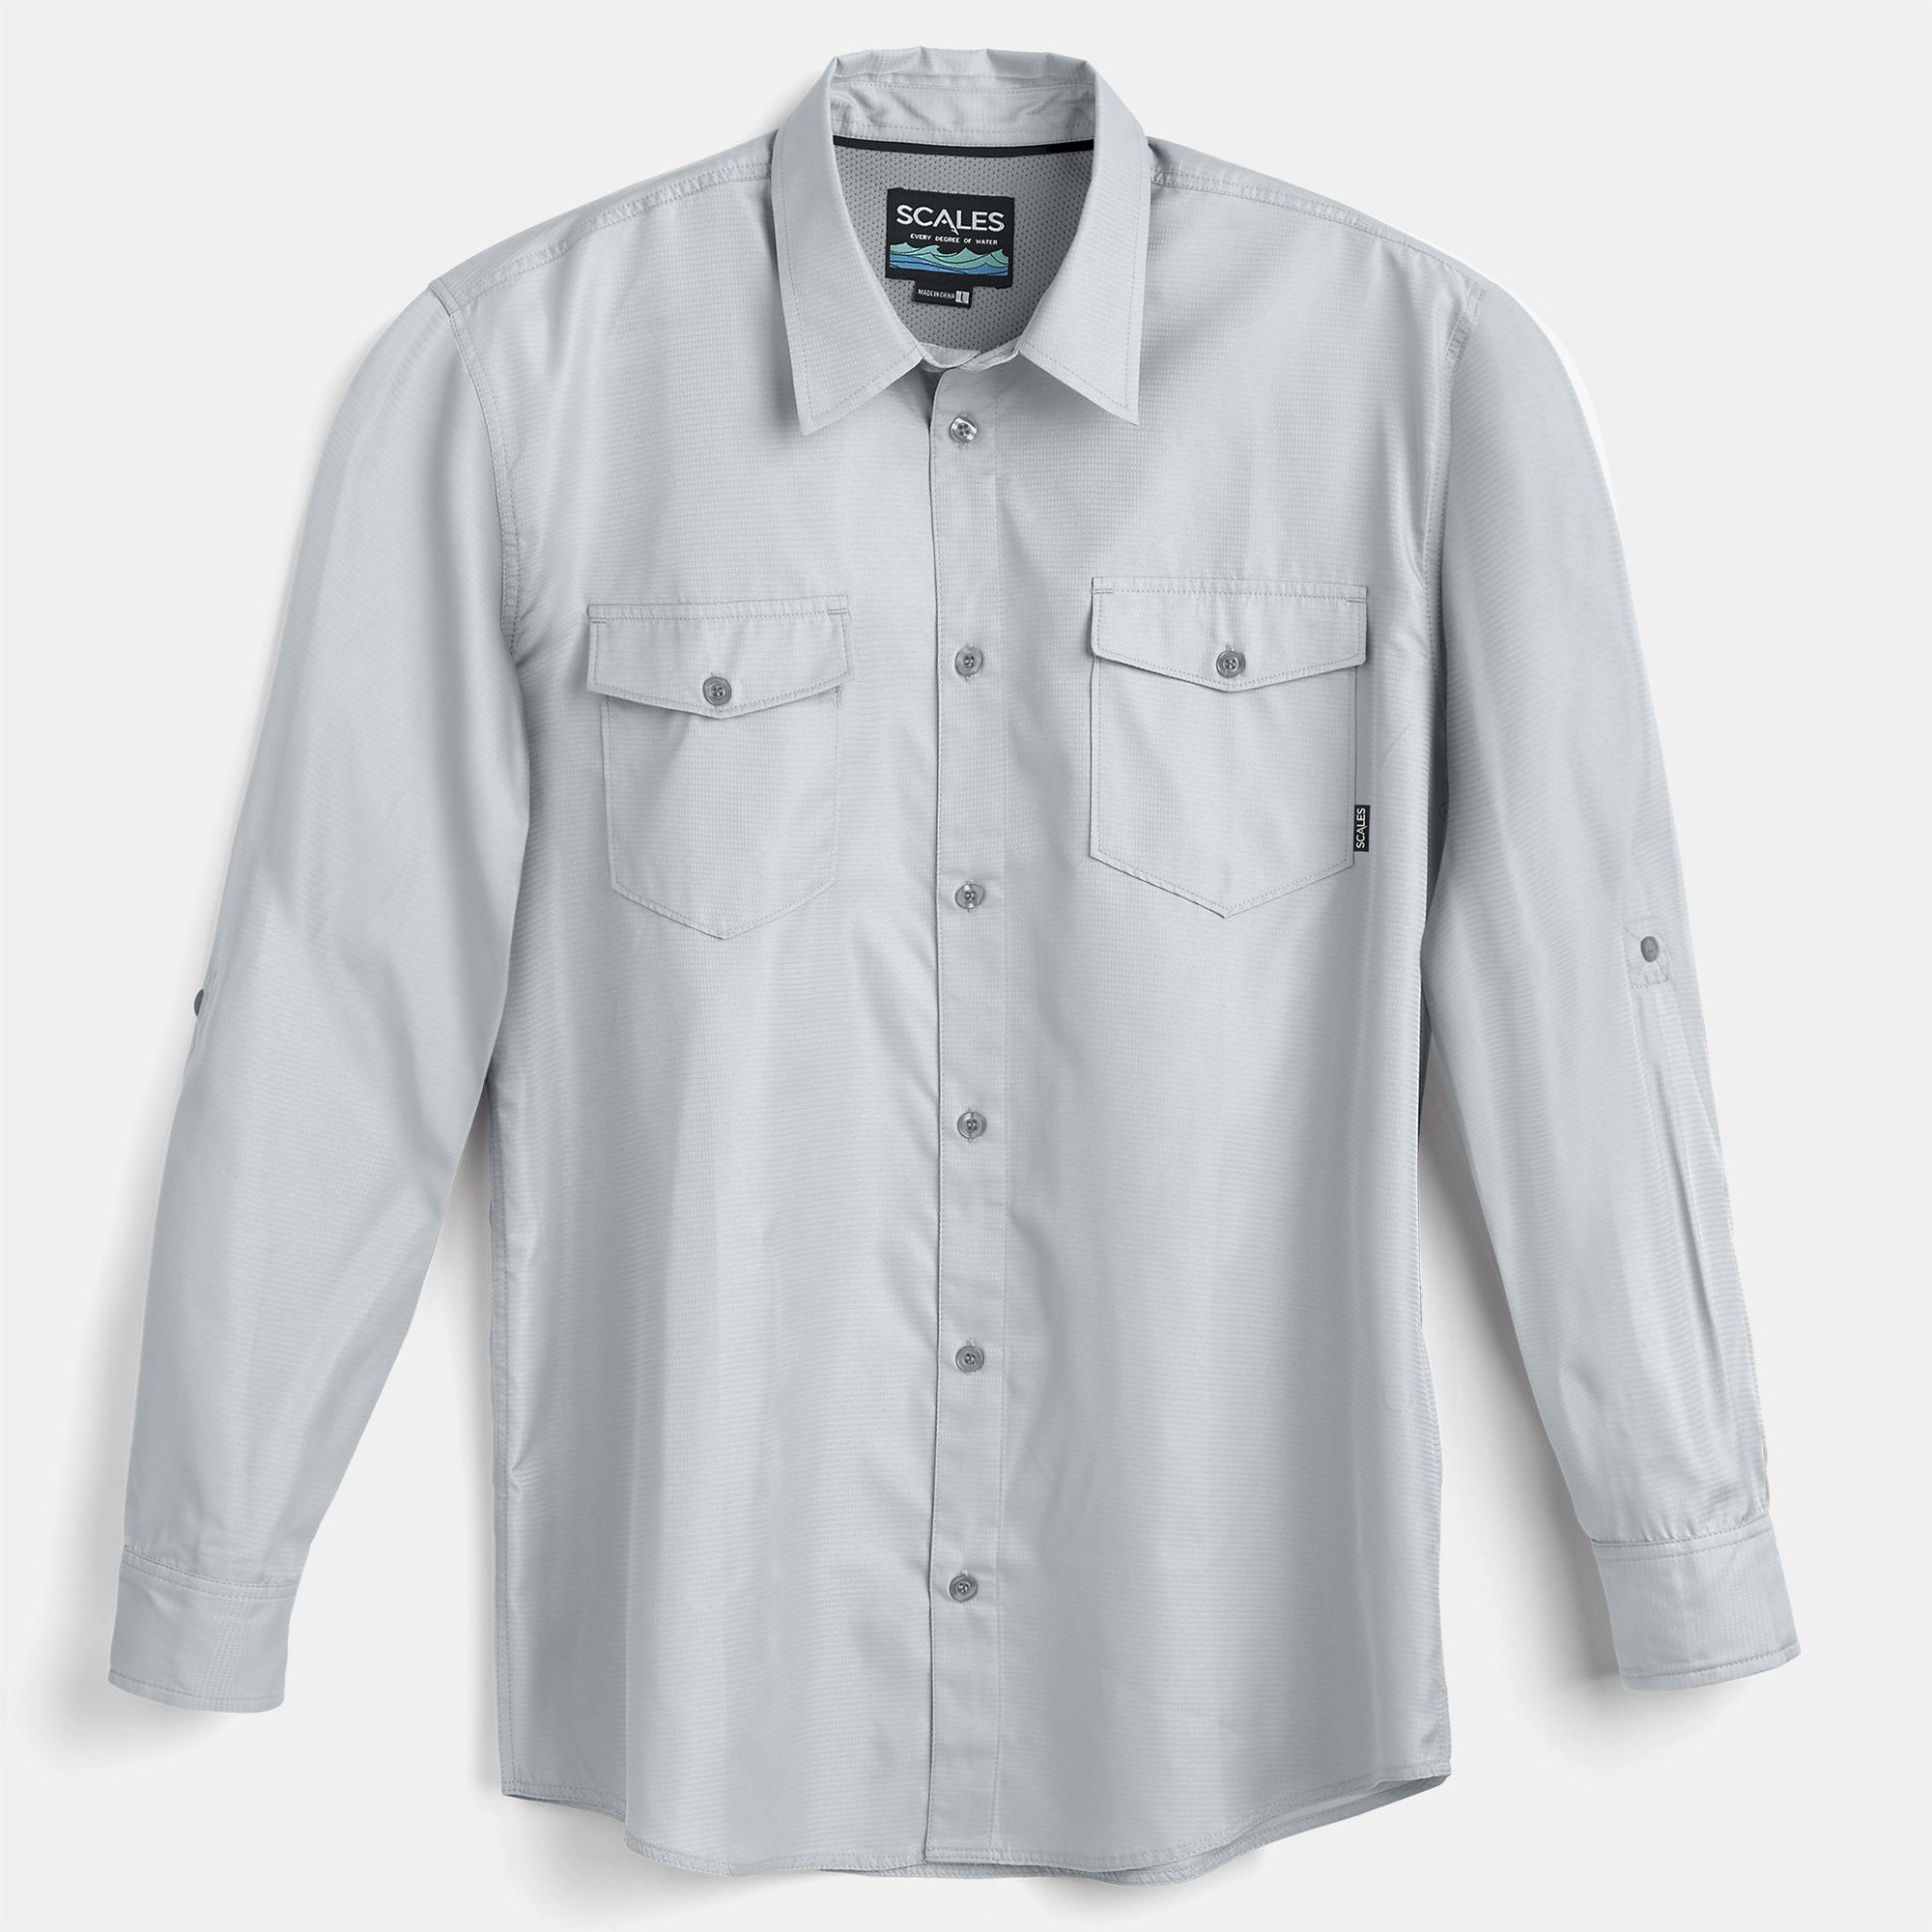 Shimano Pro Stretch Vented Shirt - Burnt Orange - Compleat Angler